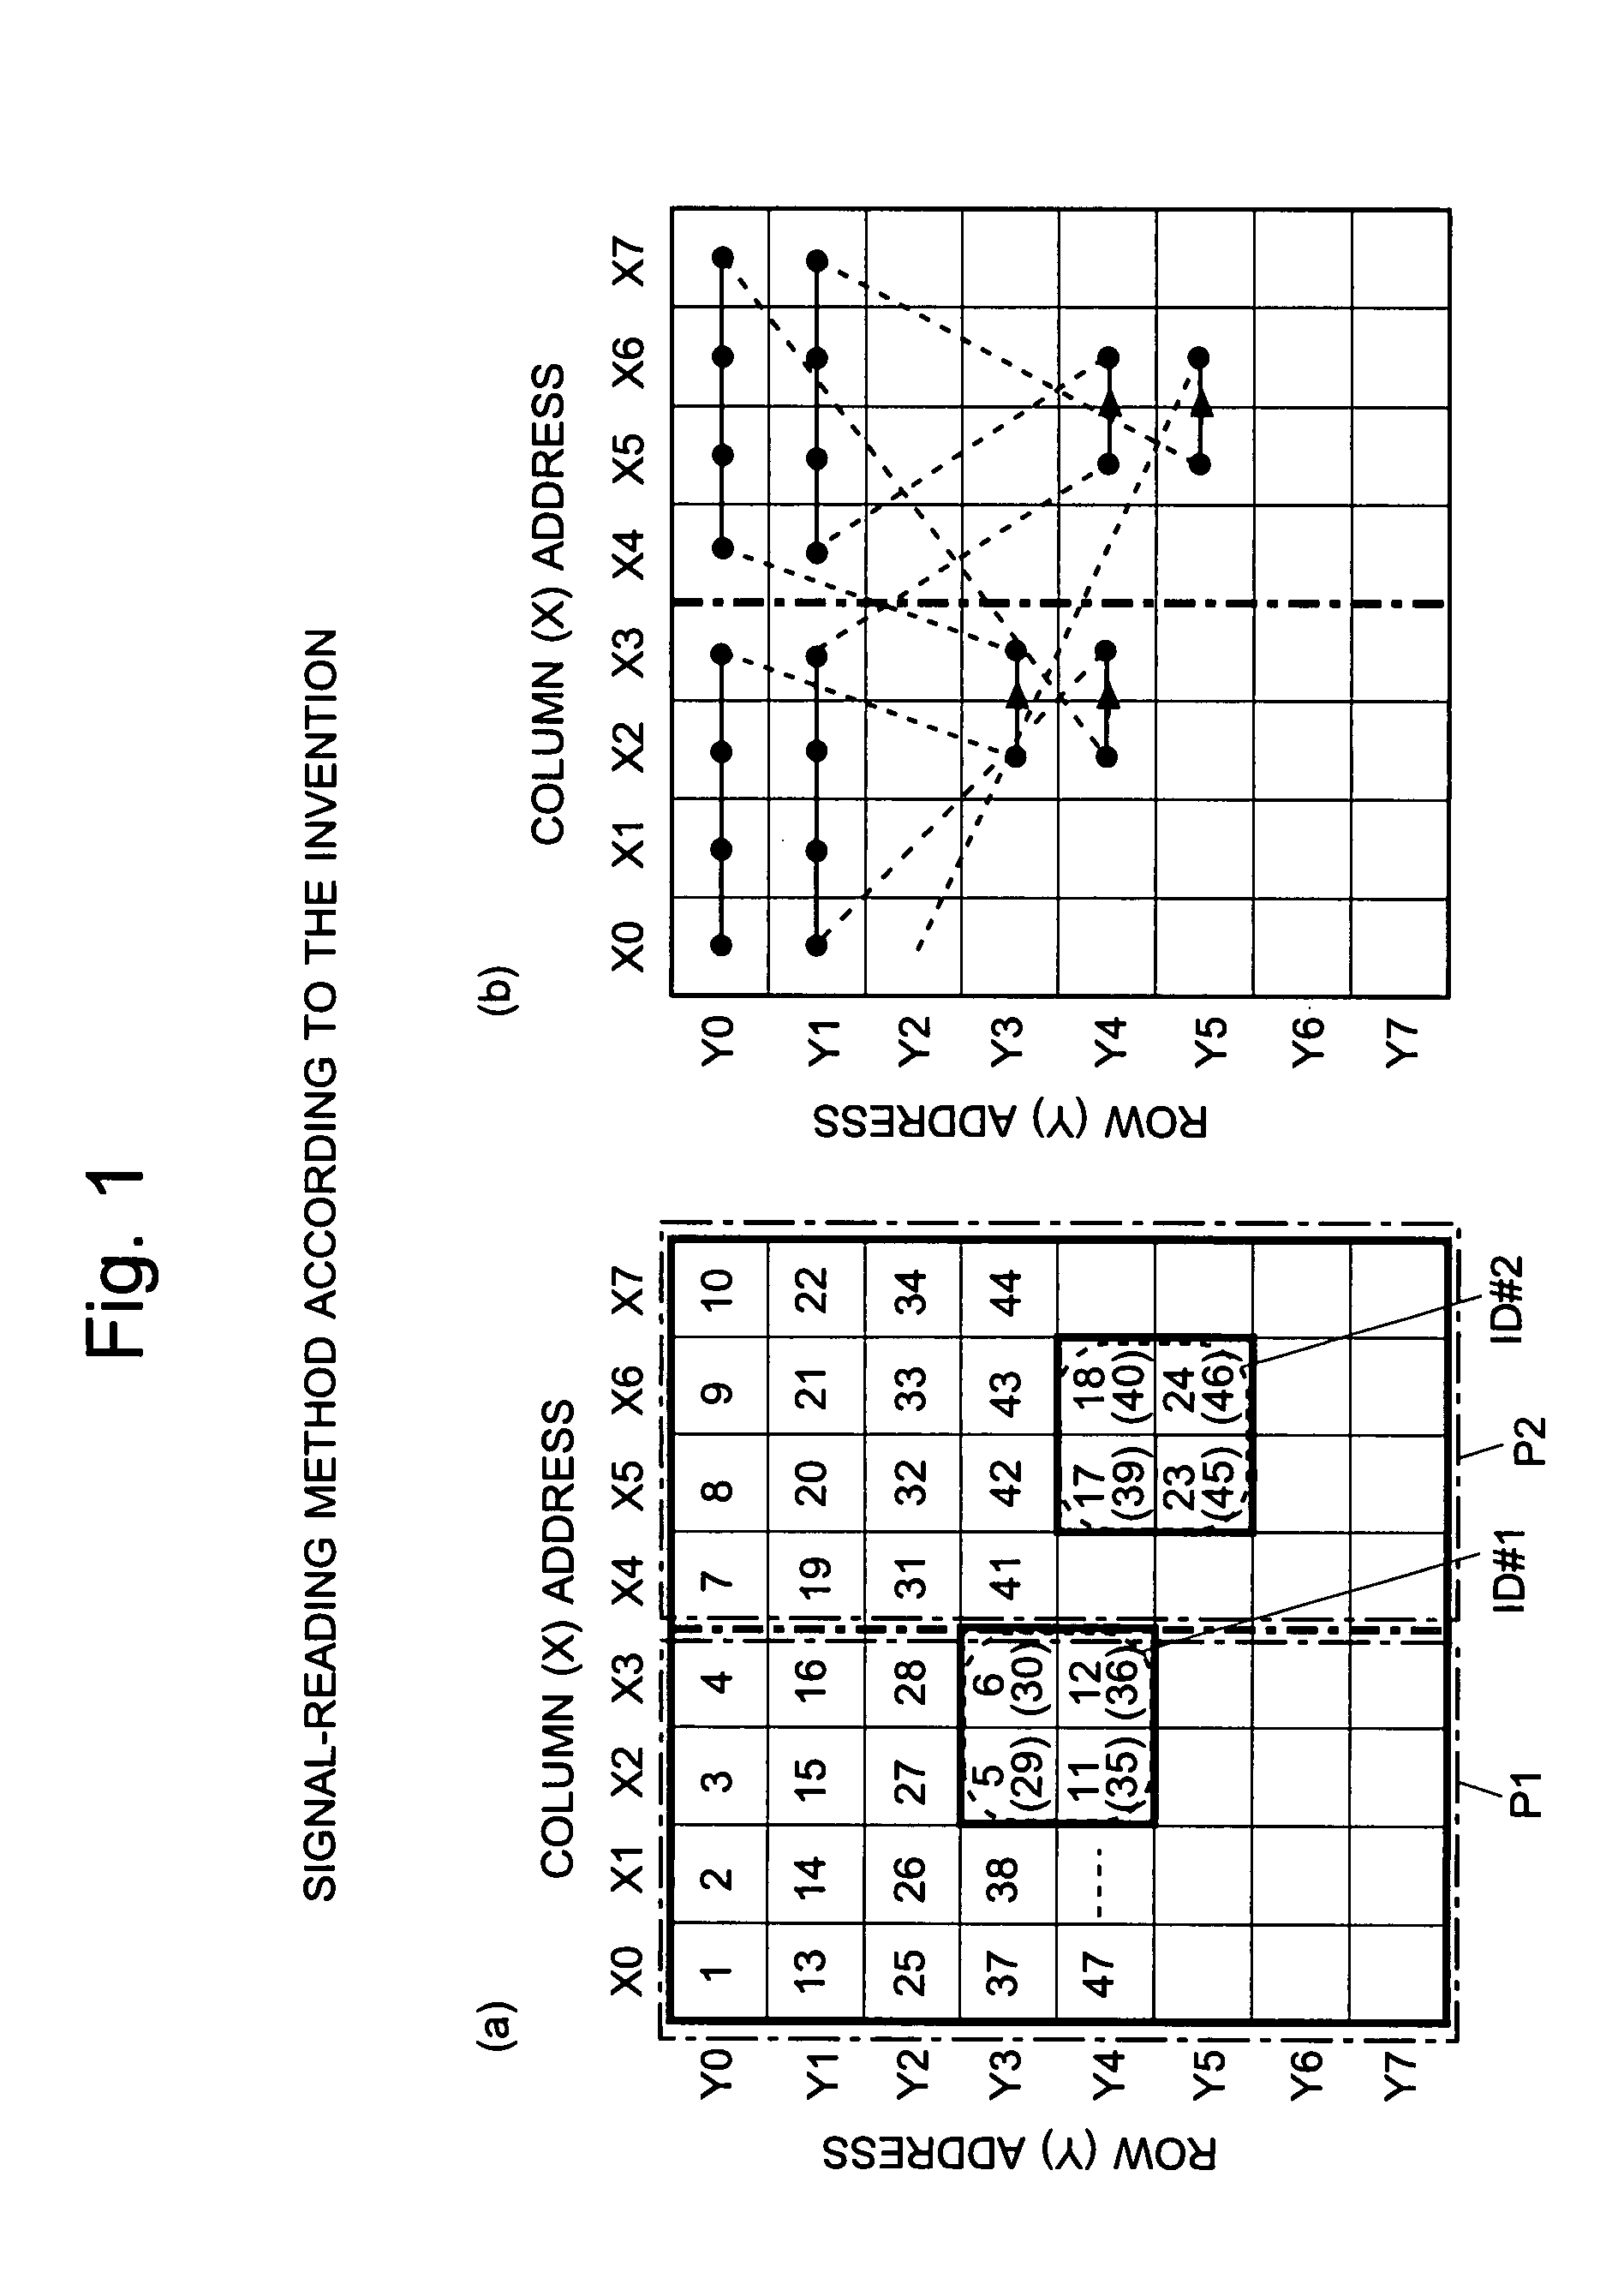 Imaging Device and Method for Reading Signals From Such Device